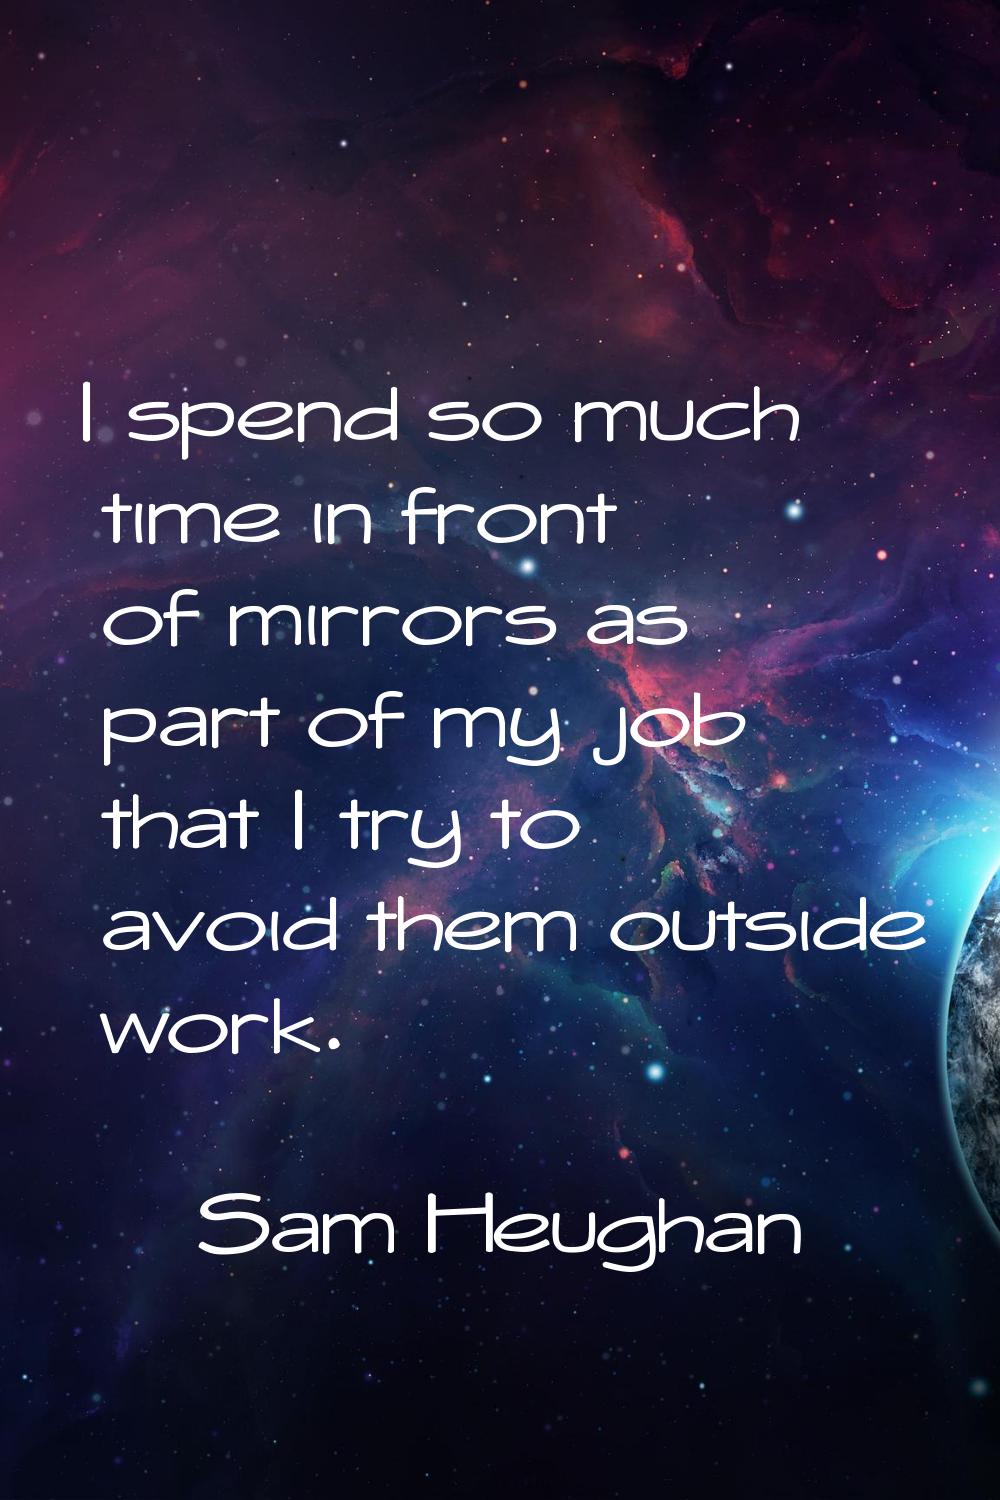 I spend so much time in front of mirrors as part of my job that I try to avoid them outside work.